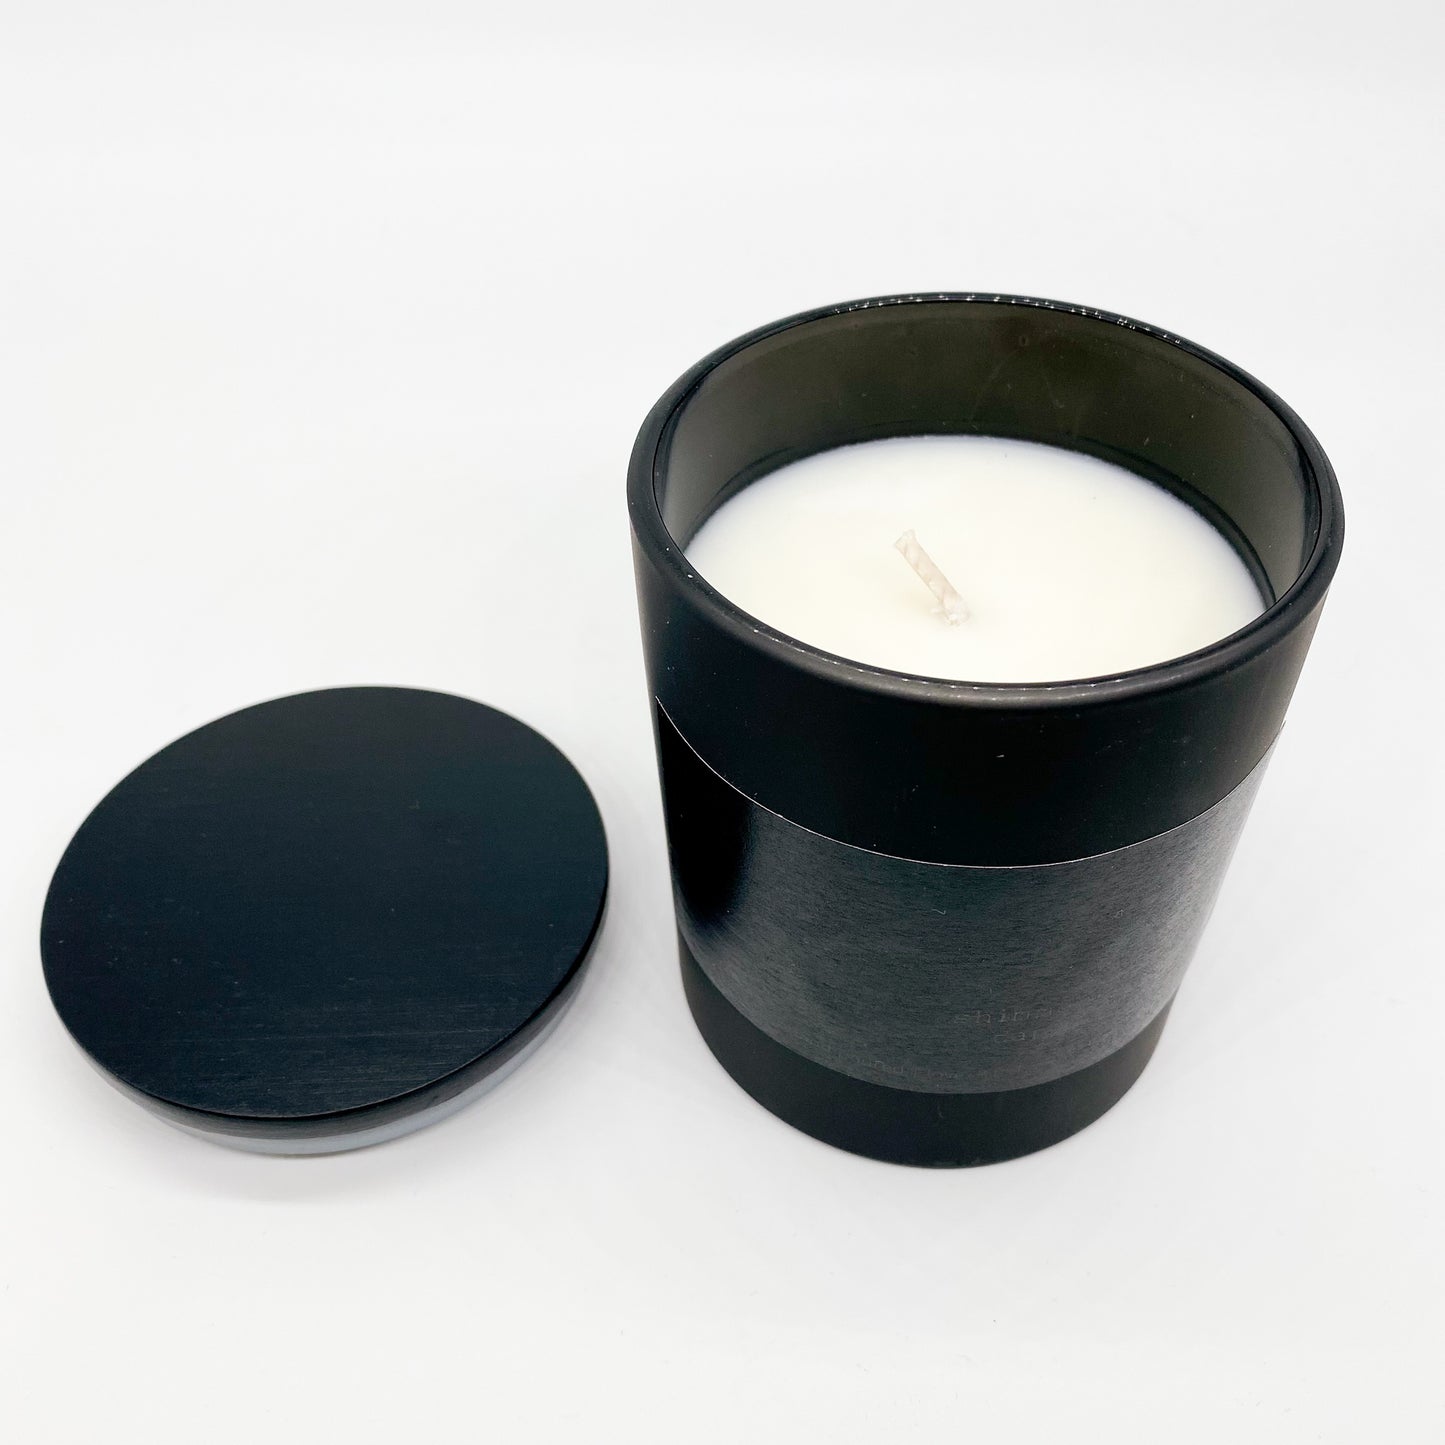 Shimmering Darkness Candle